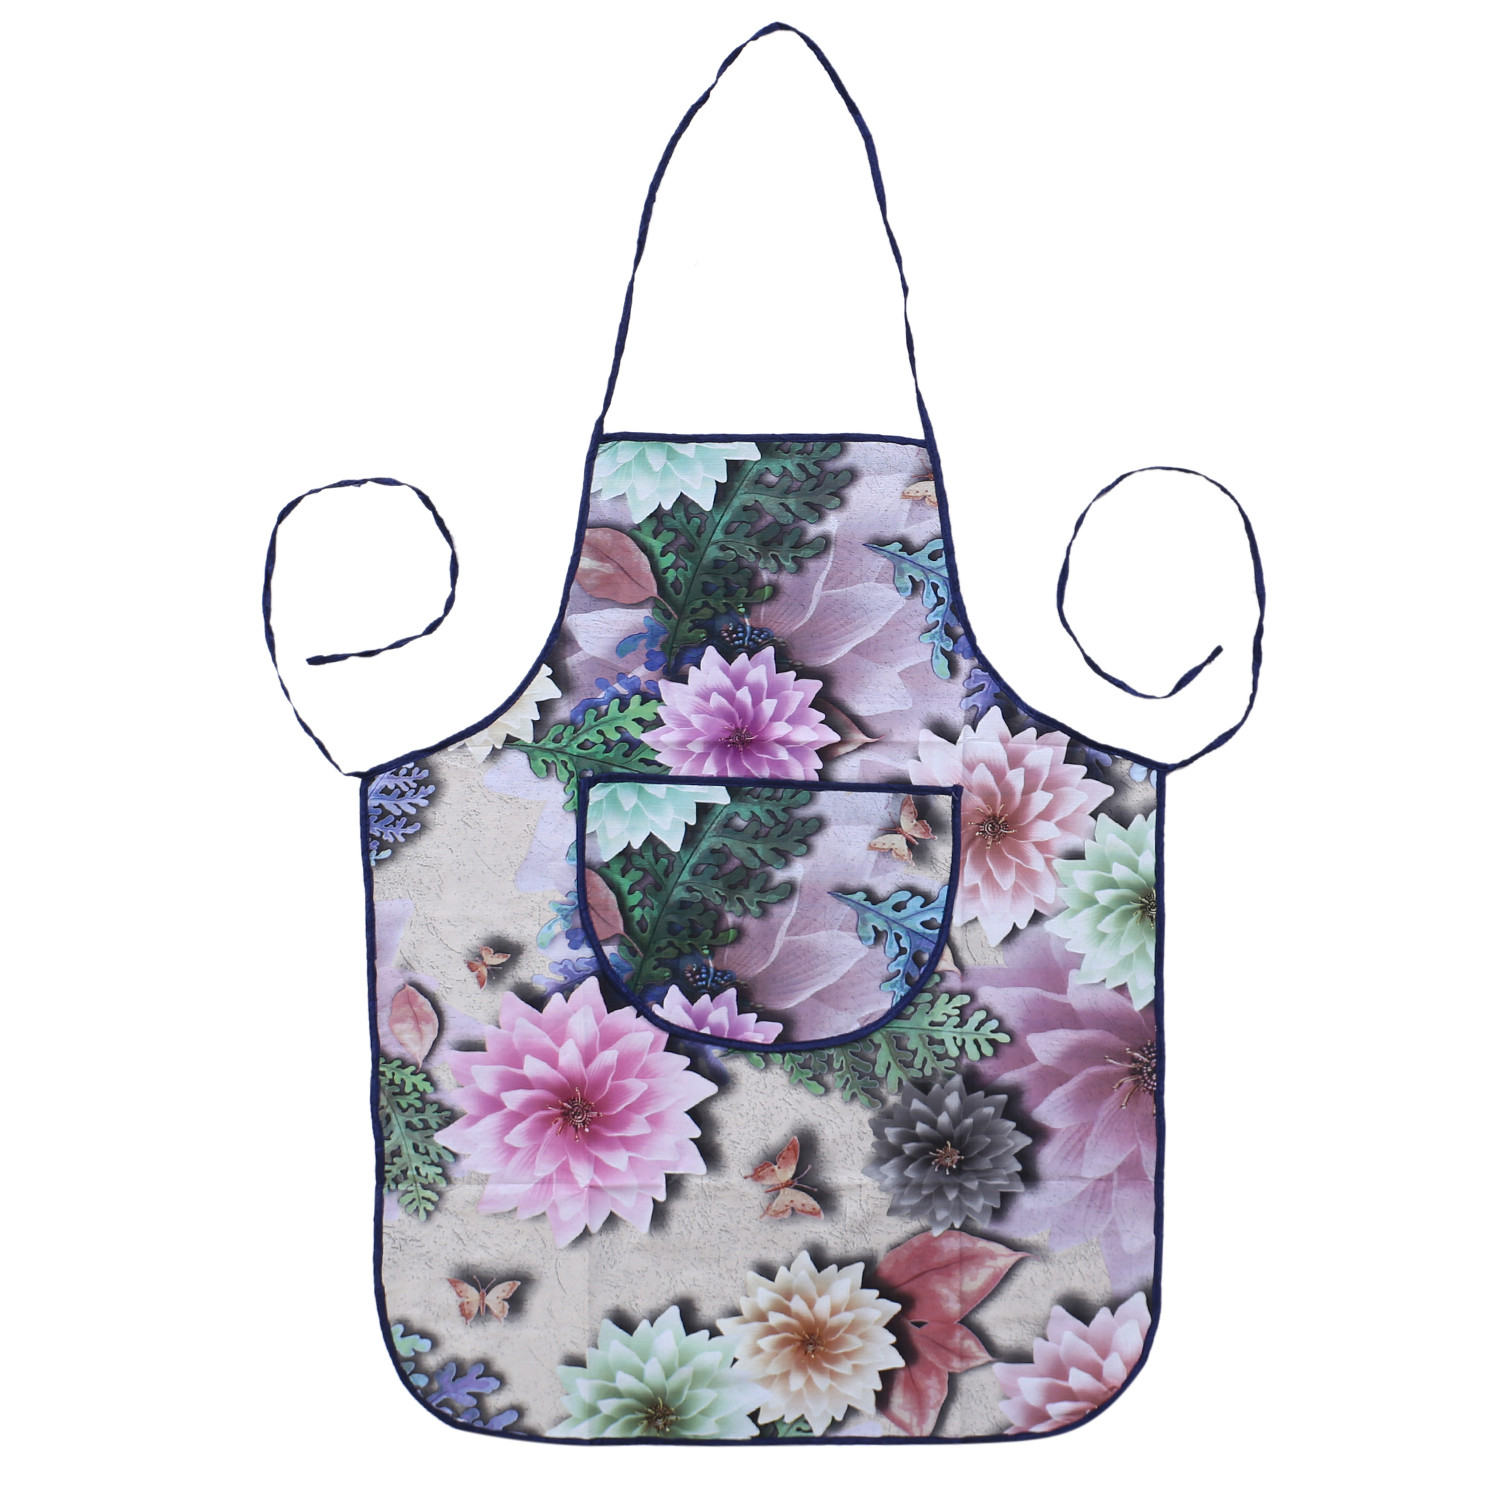 Kuber Industries Apron|PVC Unique Floral Printed Kitchen Chef Cloth|Waterproof Centre Pocket Apron With Tying Cord for Men & Women (Multicolor)